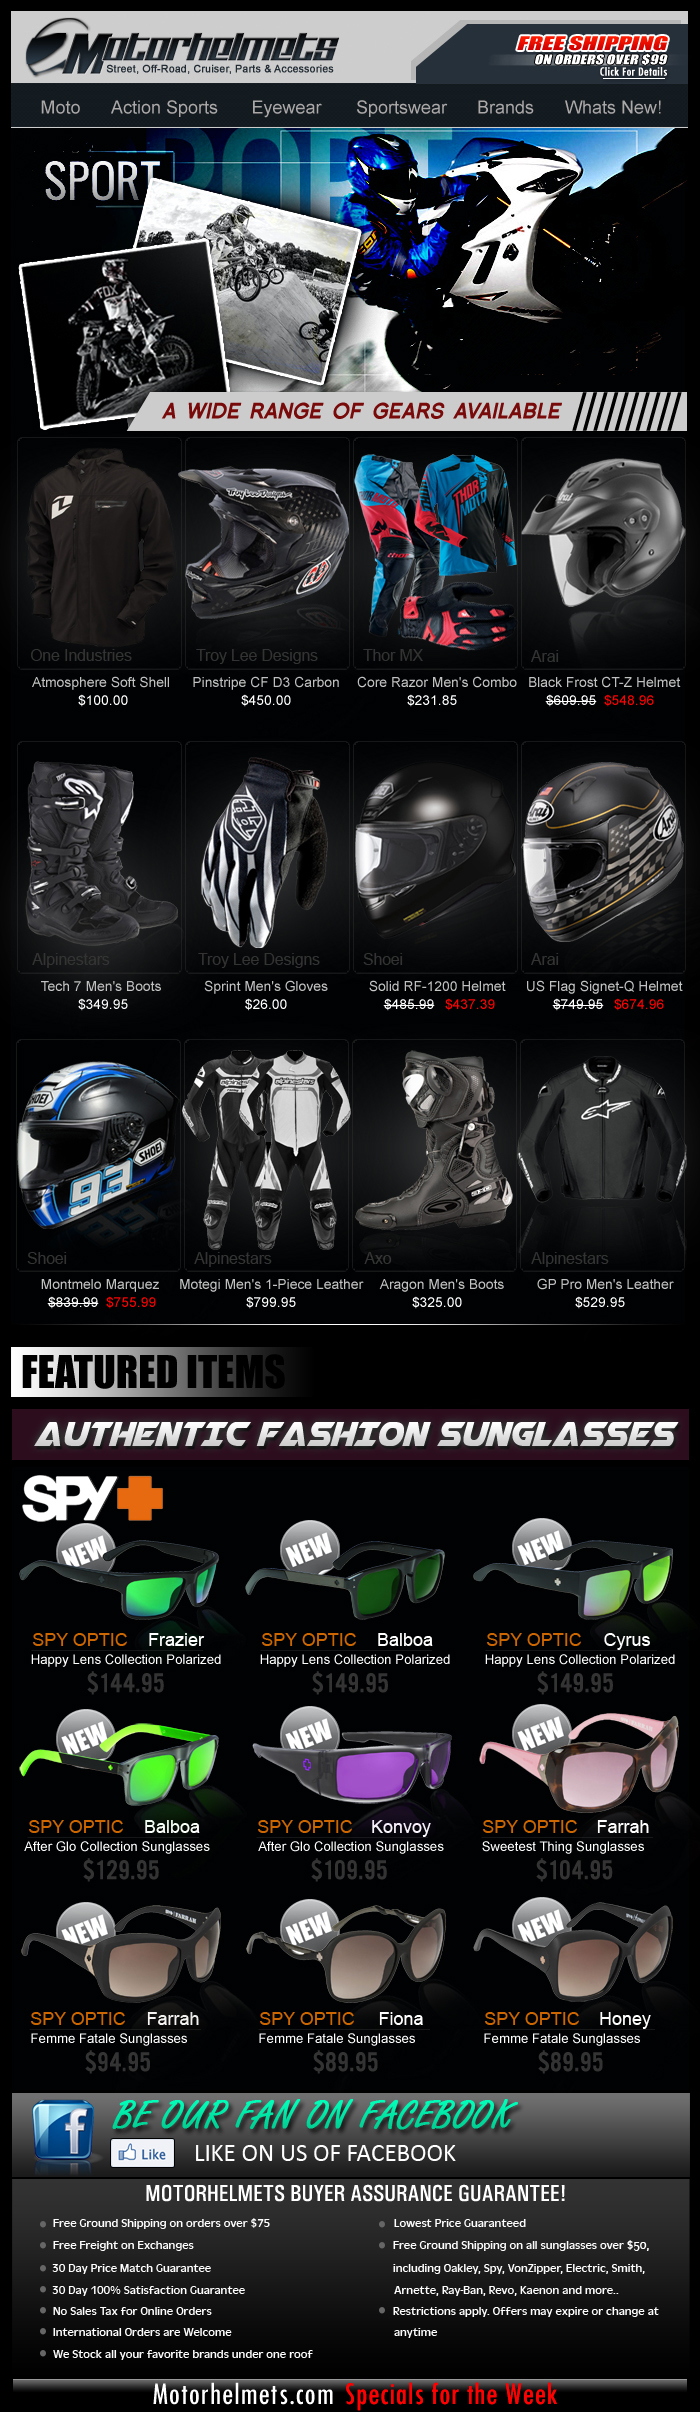 Gear up for Summer...Premium Motorcycle Gear from TLD, ThorMX, Alpinestars and more!